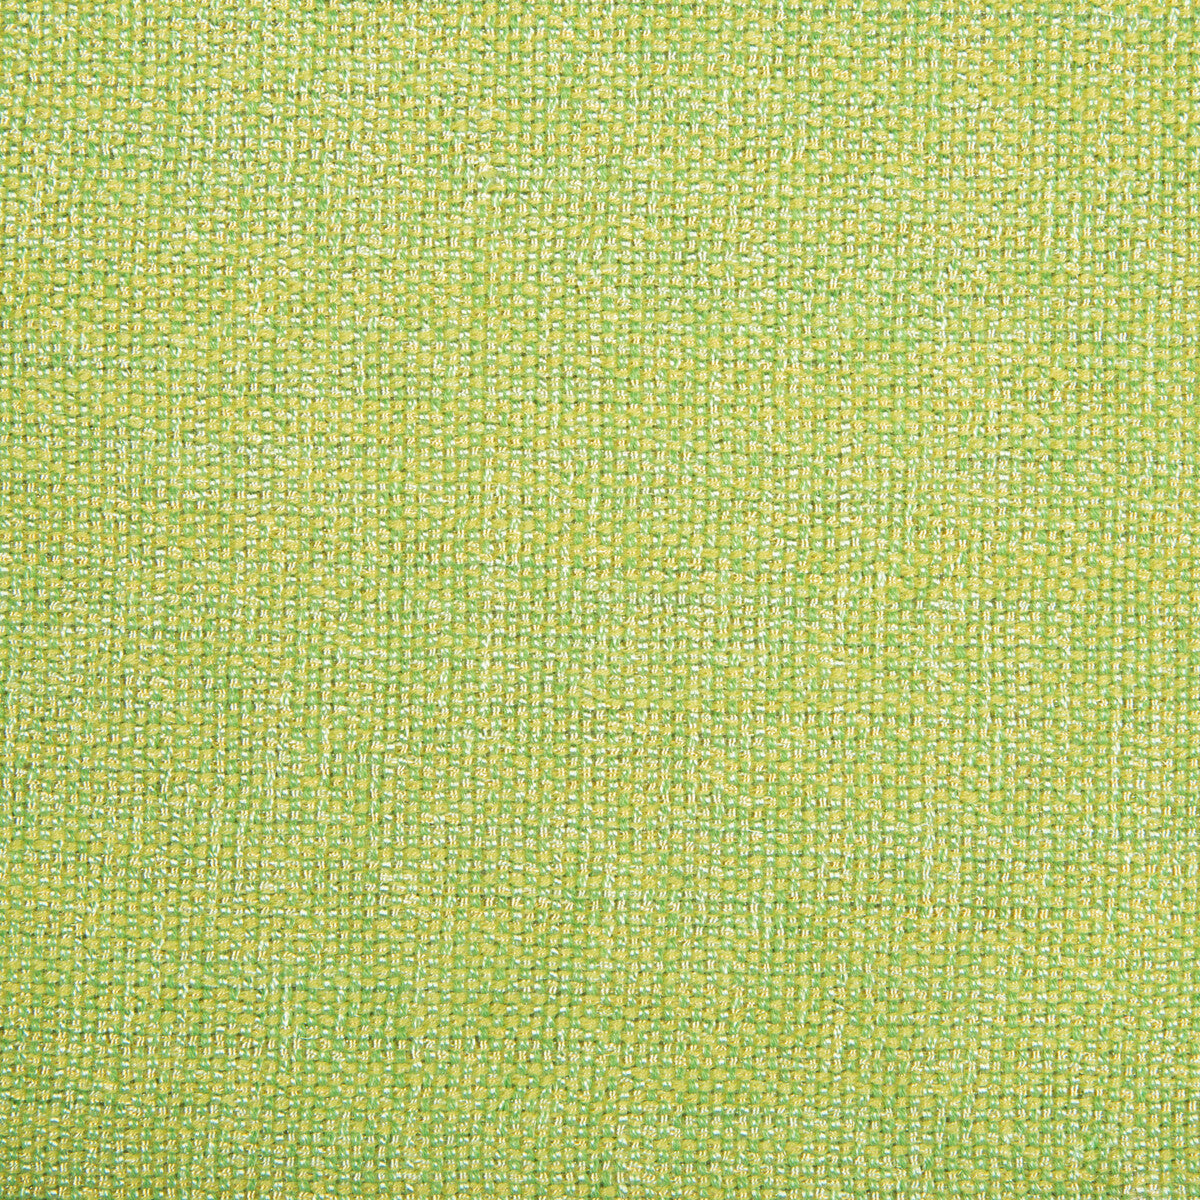 Kravet Contract fabric in 34926-1423 color - pattern 34926.1423.0 - by Kravet Contract